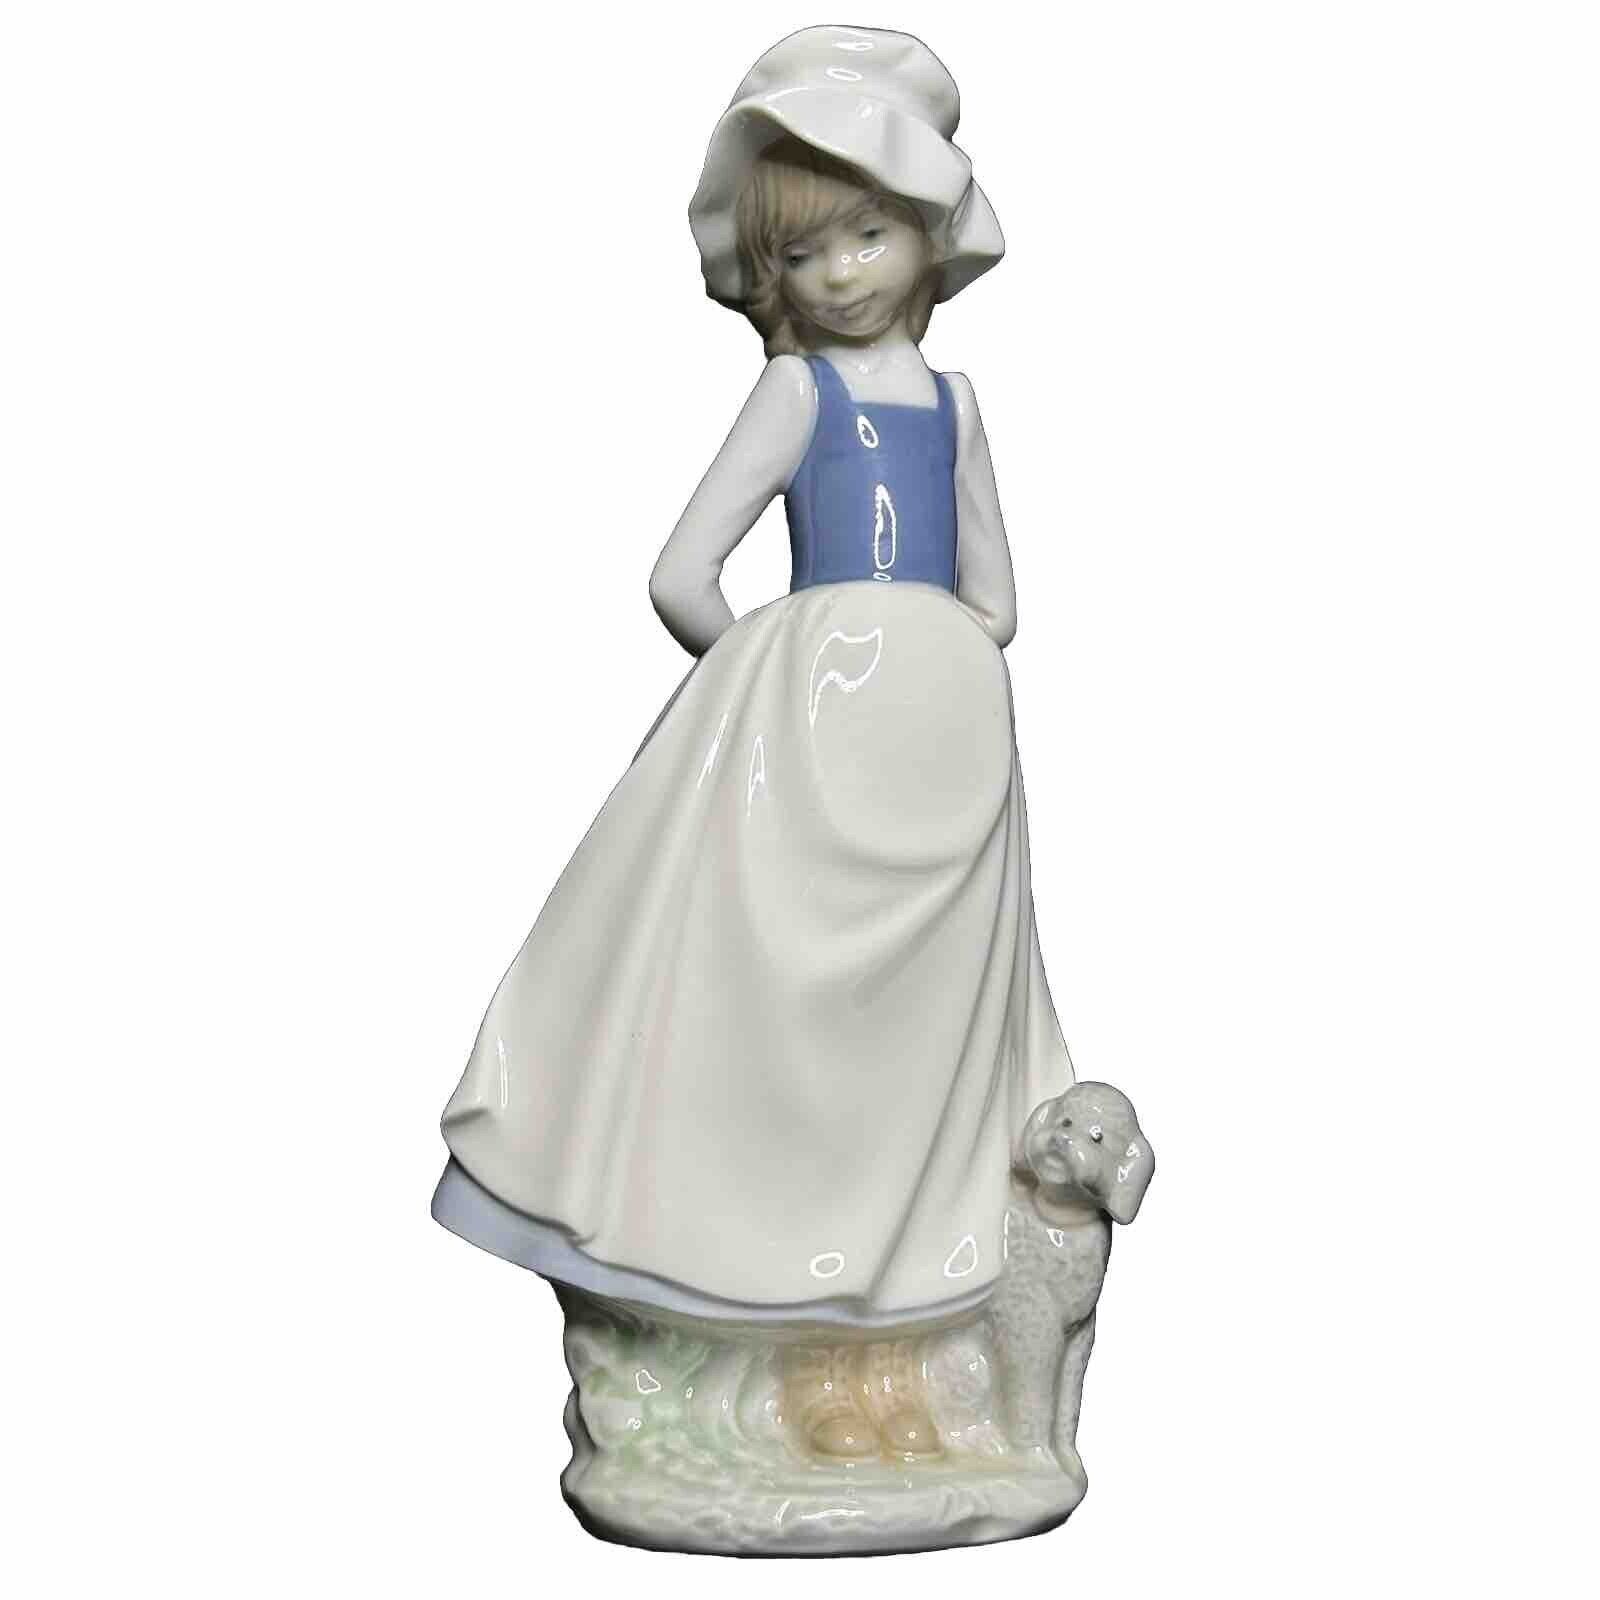 Nao By Lladro Girl with Poodle Dog Figure Handmade in Spain 1983